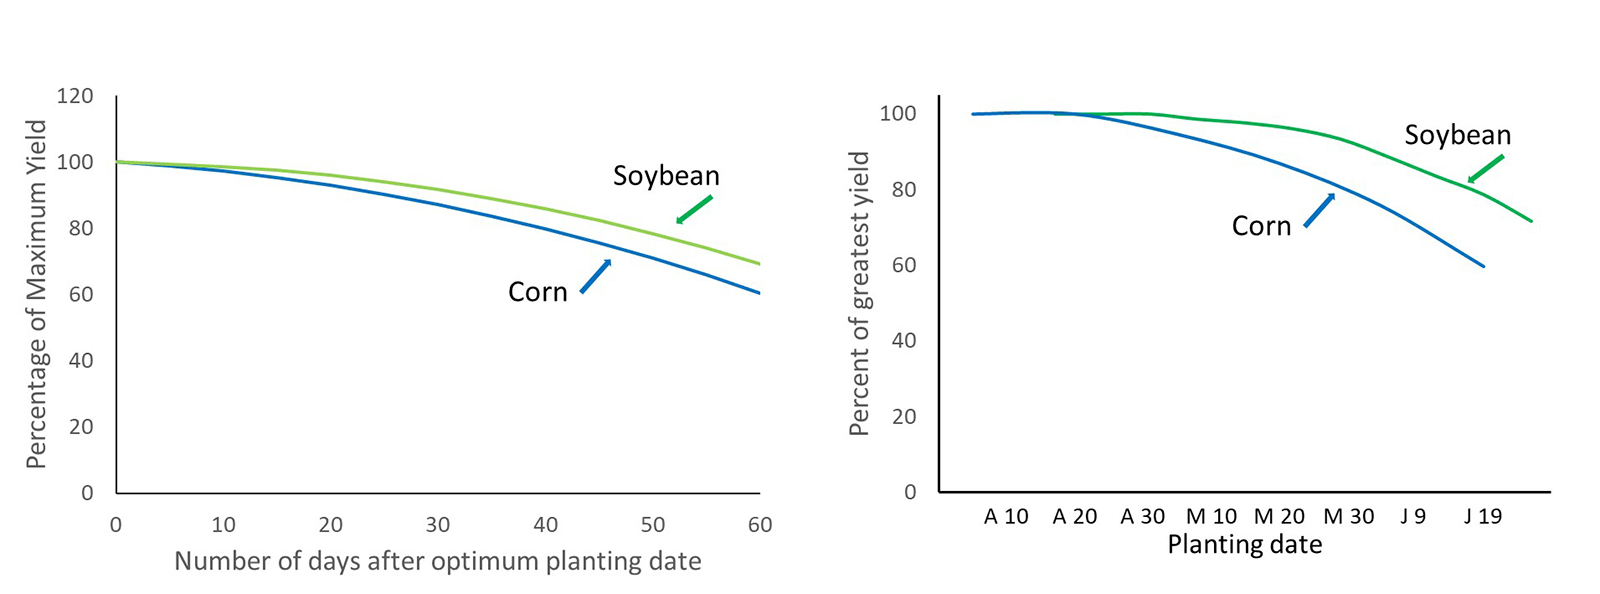 Open Left: Response of corn and soybean yields to planting dates relative to dates with highest yield for each crop. Data are expressed as relative yield. Right: Effect of planting date on corn and soybean yields. Data are expressed as relative yield.